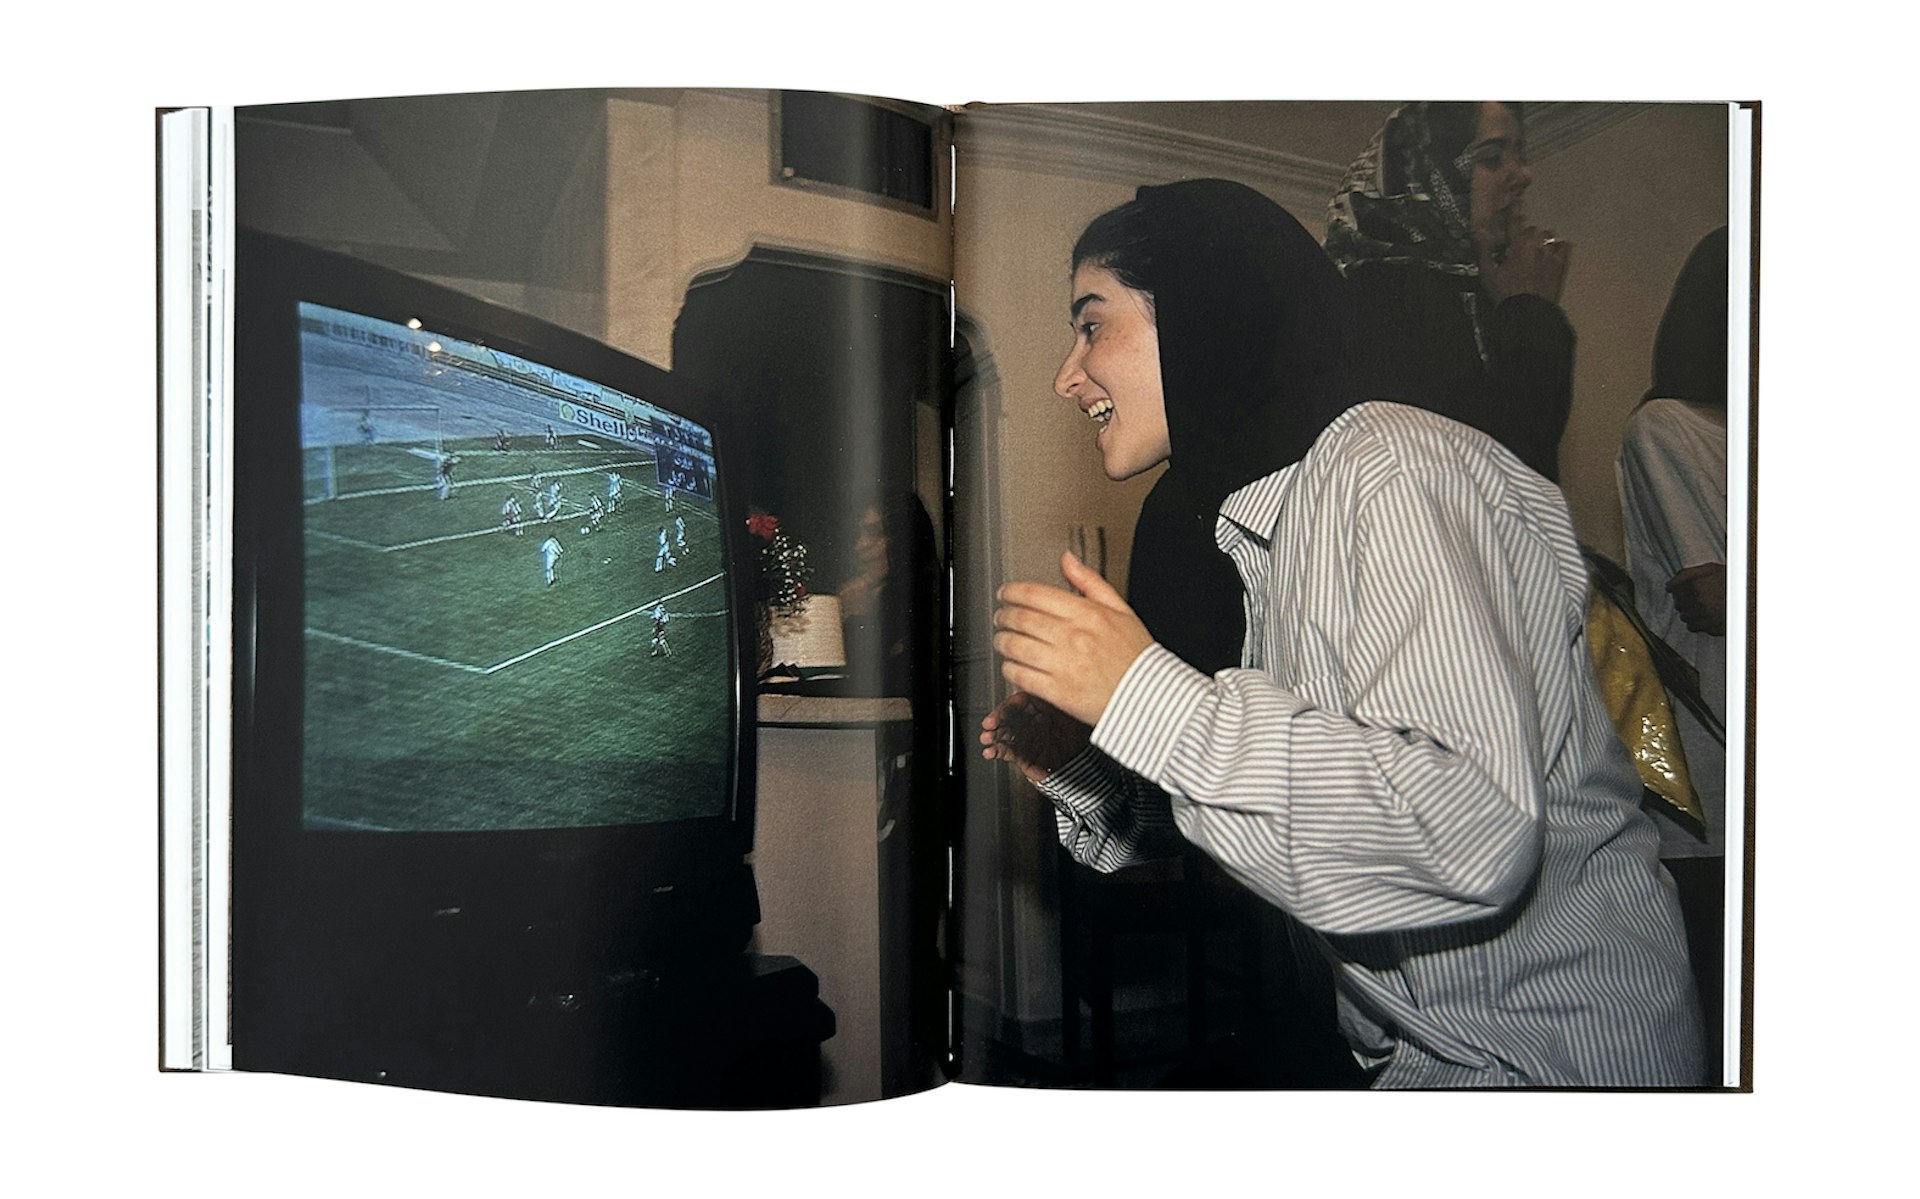 Exploring the football fanatic culture of the Middle East